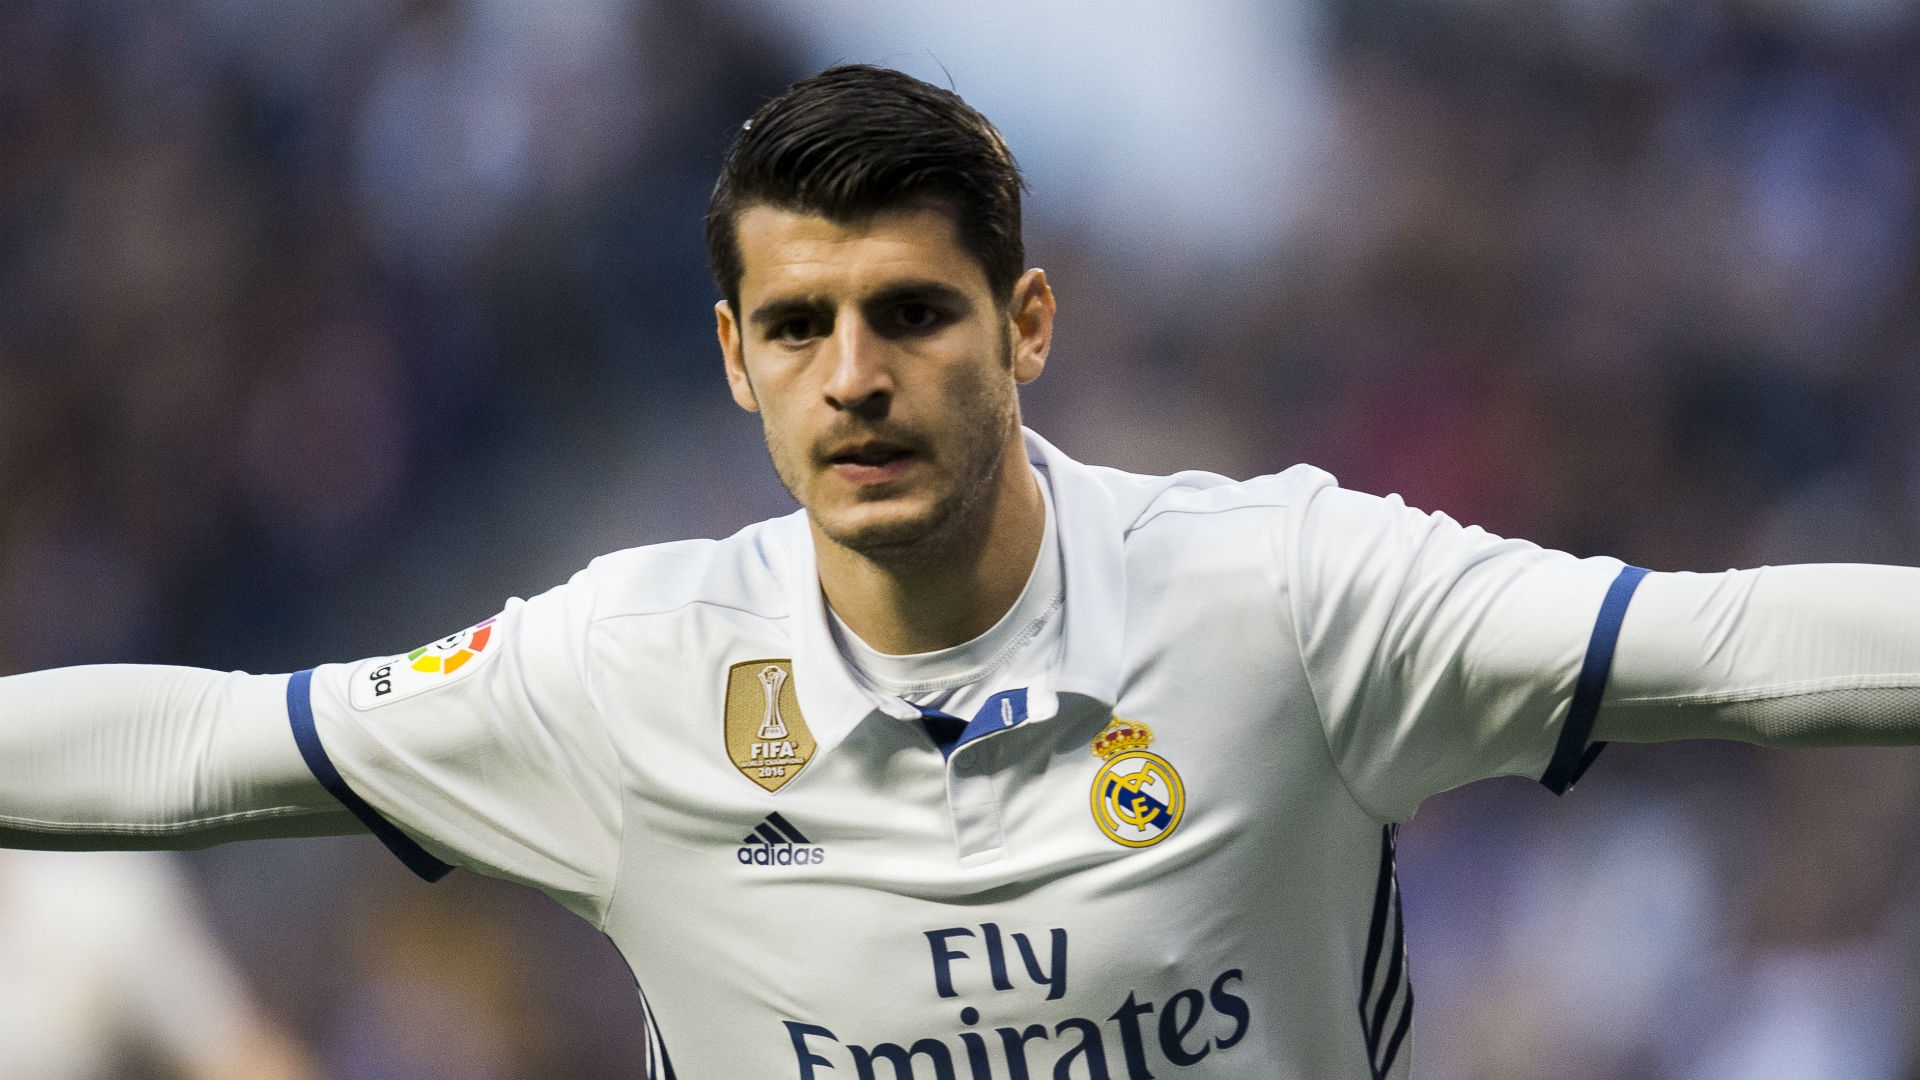 Morata was often benched during Real's previous season and he would naturally be anxious to get more playing time.